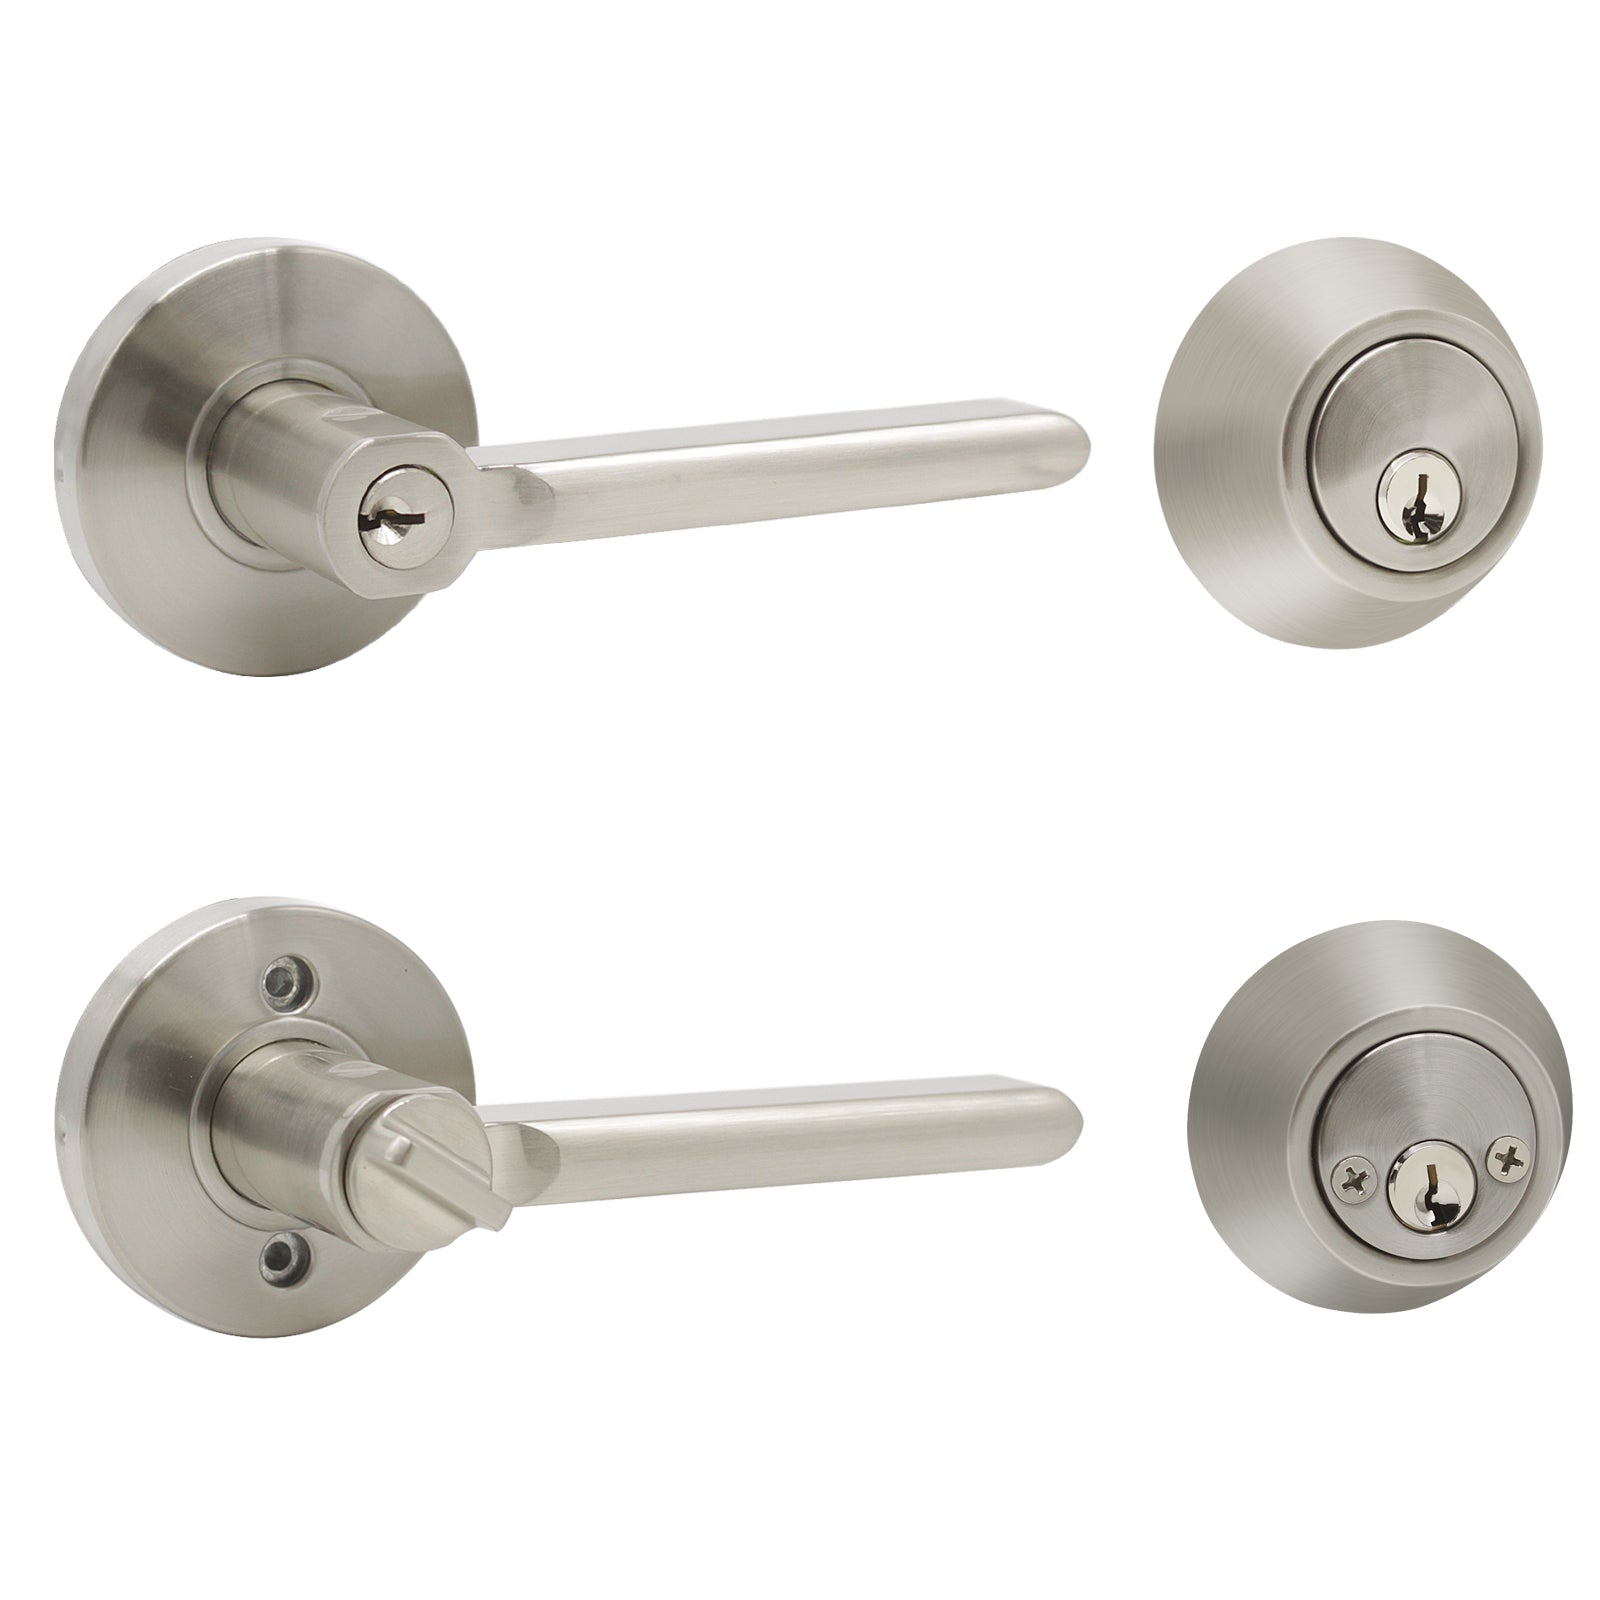 Keyed Entry Door Lever Lock and Double Cylinder Deadbolts Combo Pack (Keyed Alike), Satin Nickel Finish DL1637ET-102SN